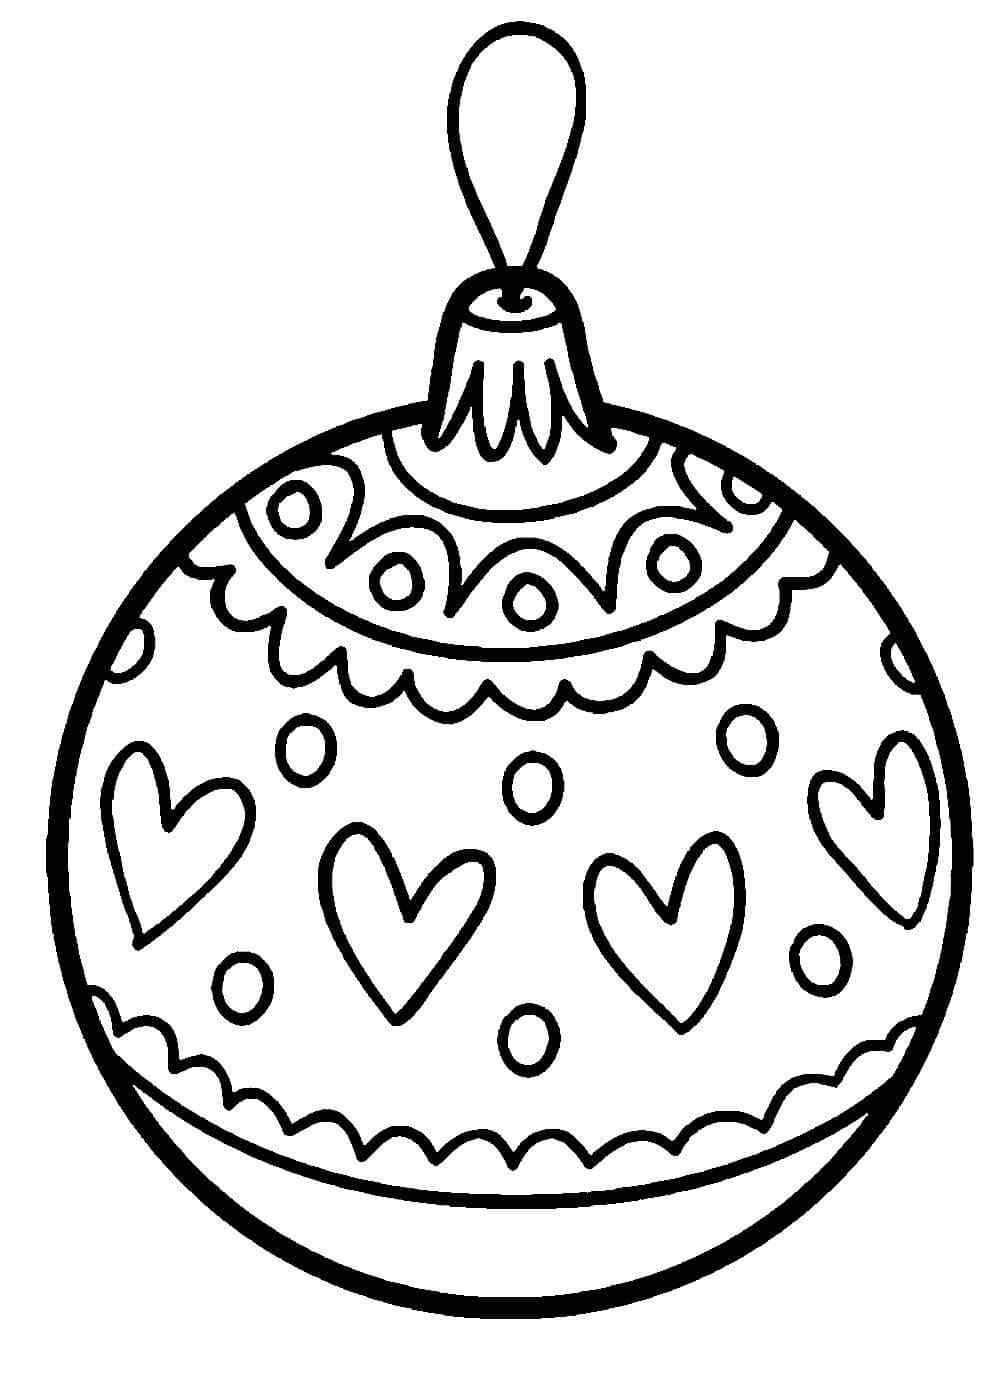 Hearts Decorate The Christmas Ball